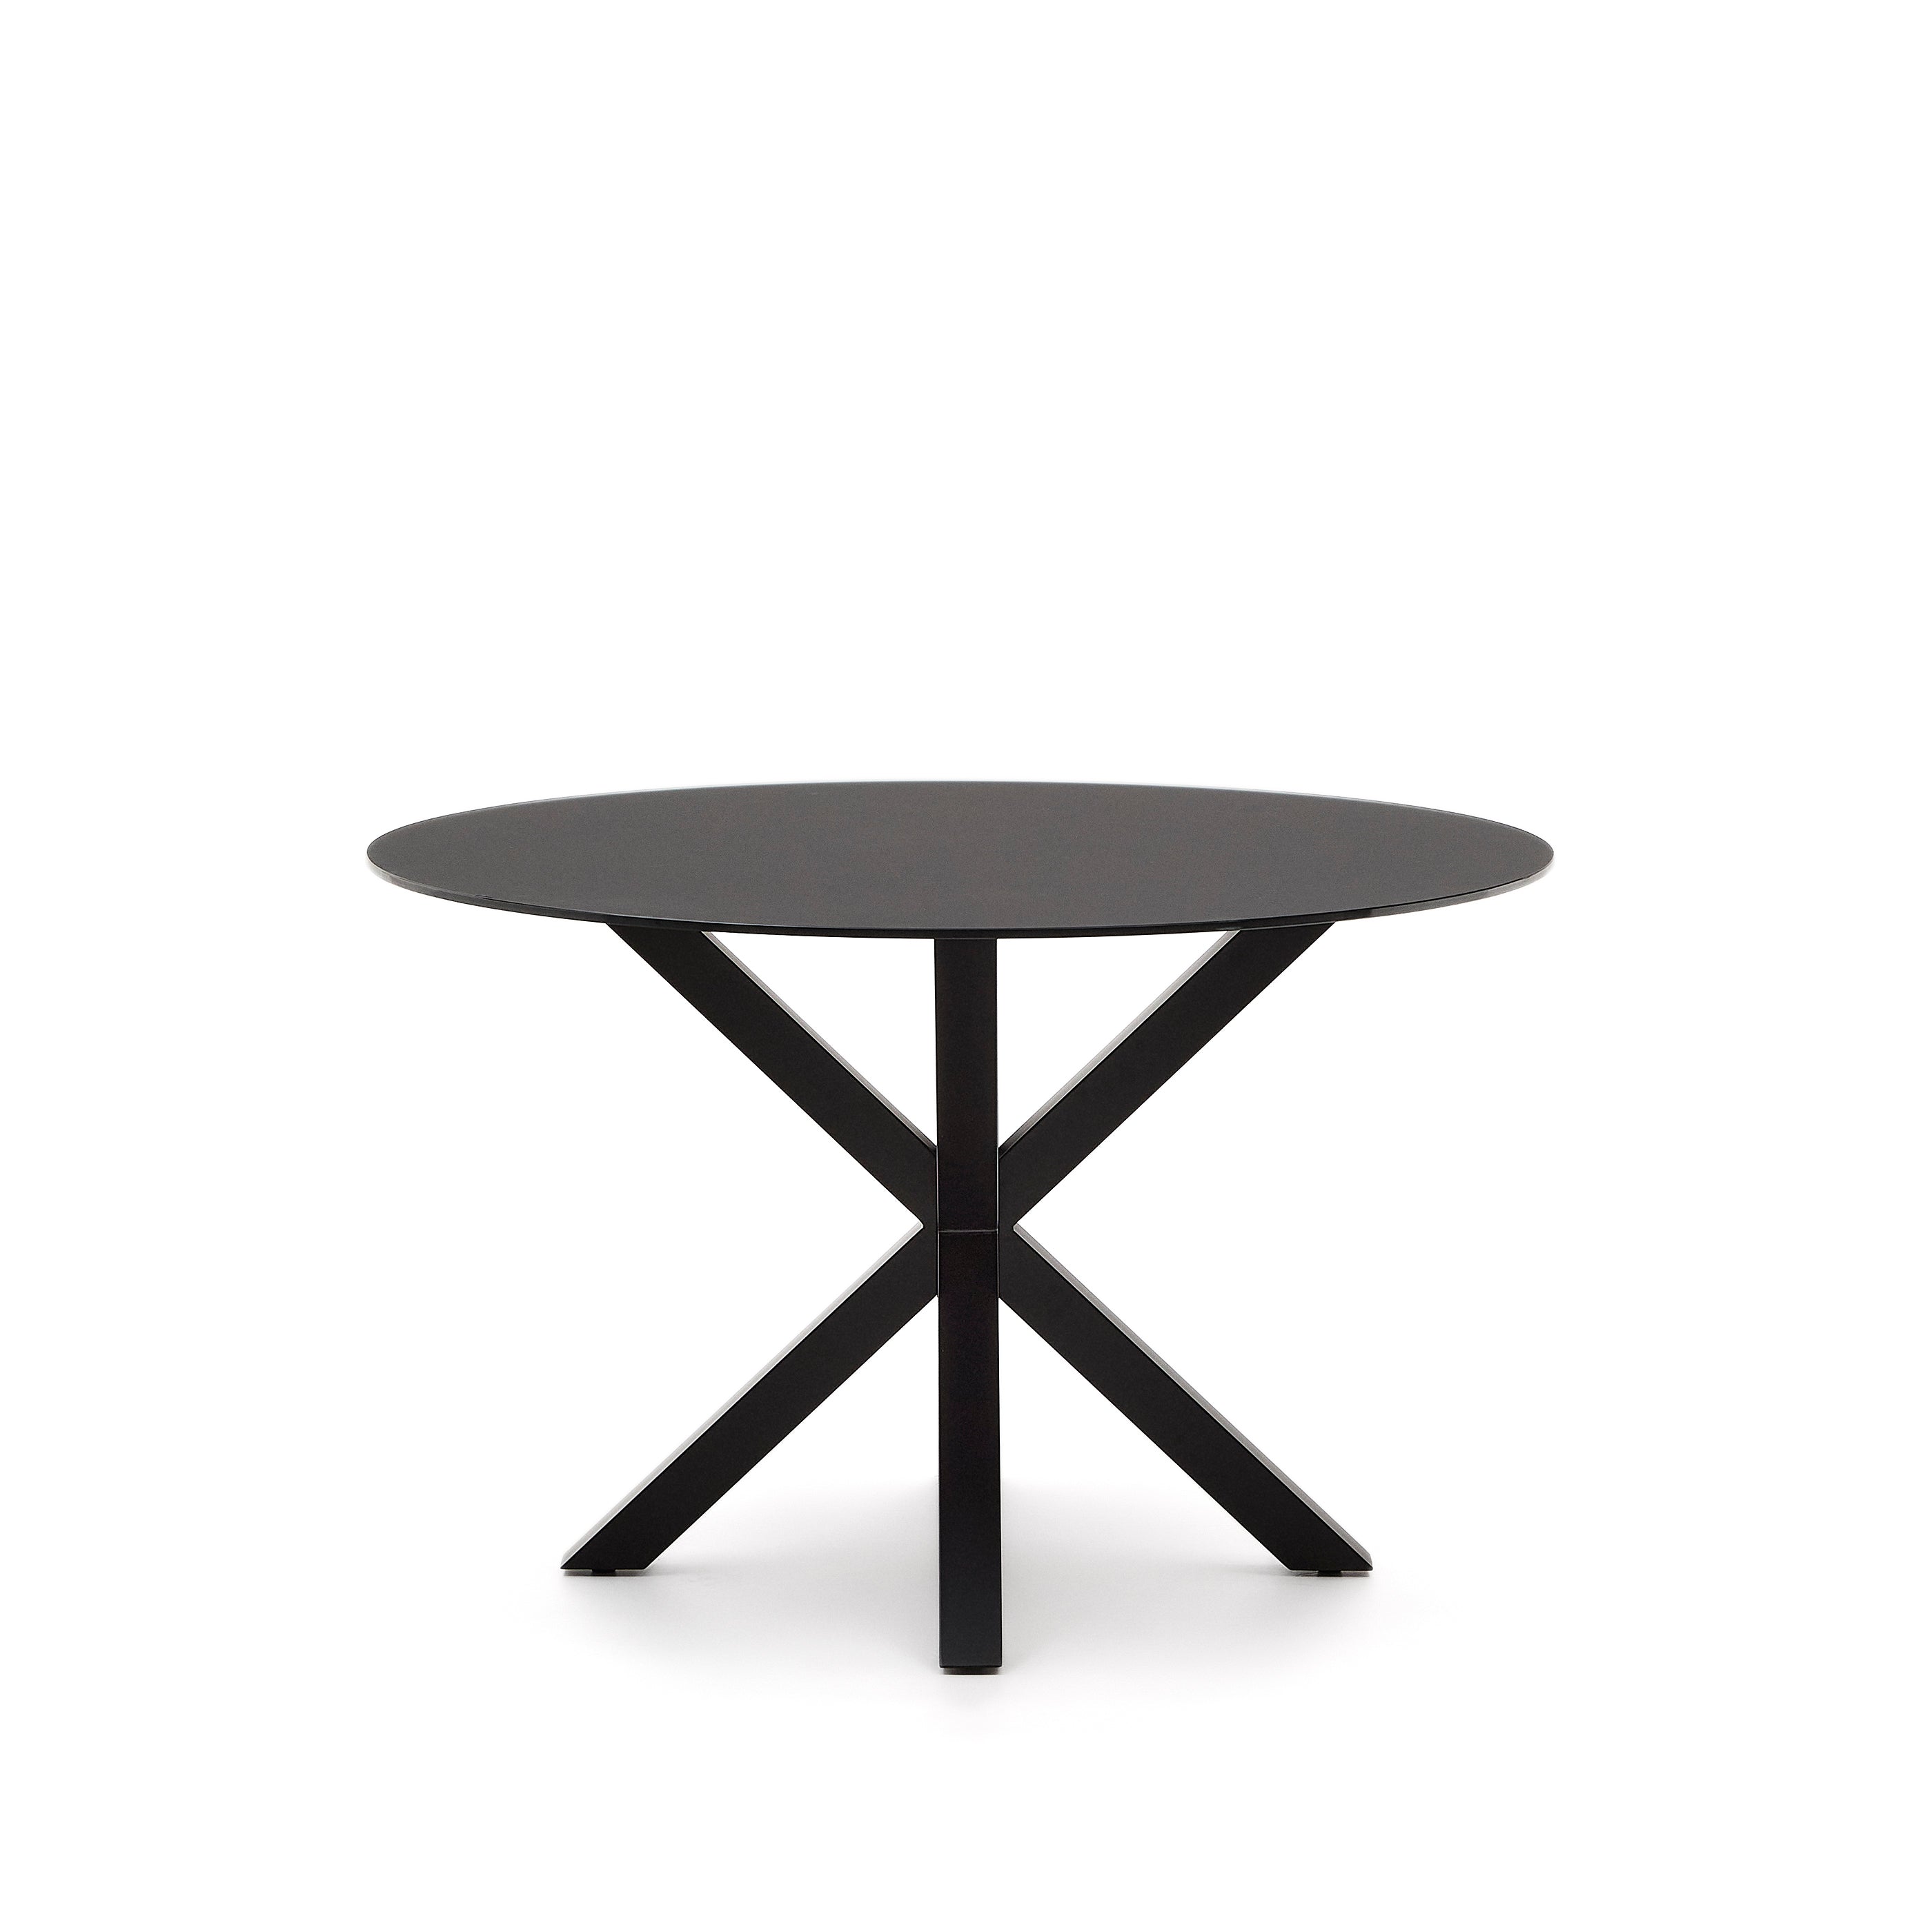 Argo round table with black glass and black steel legs Ø 120 cm